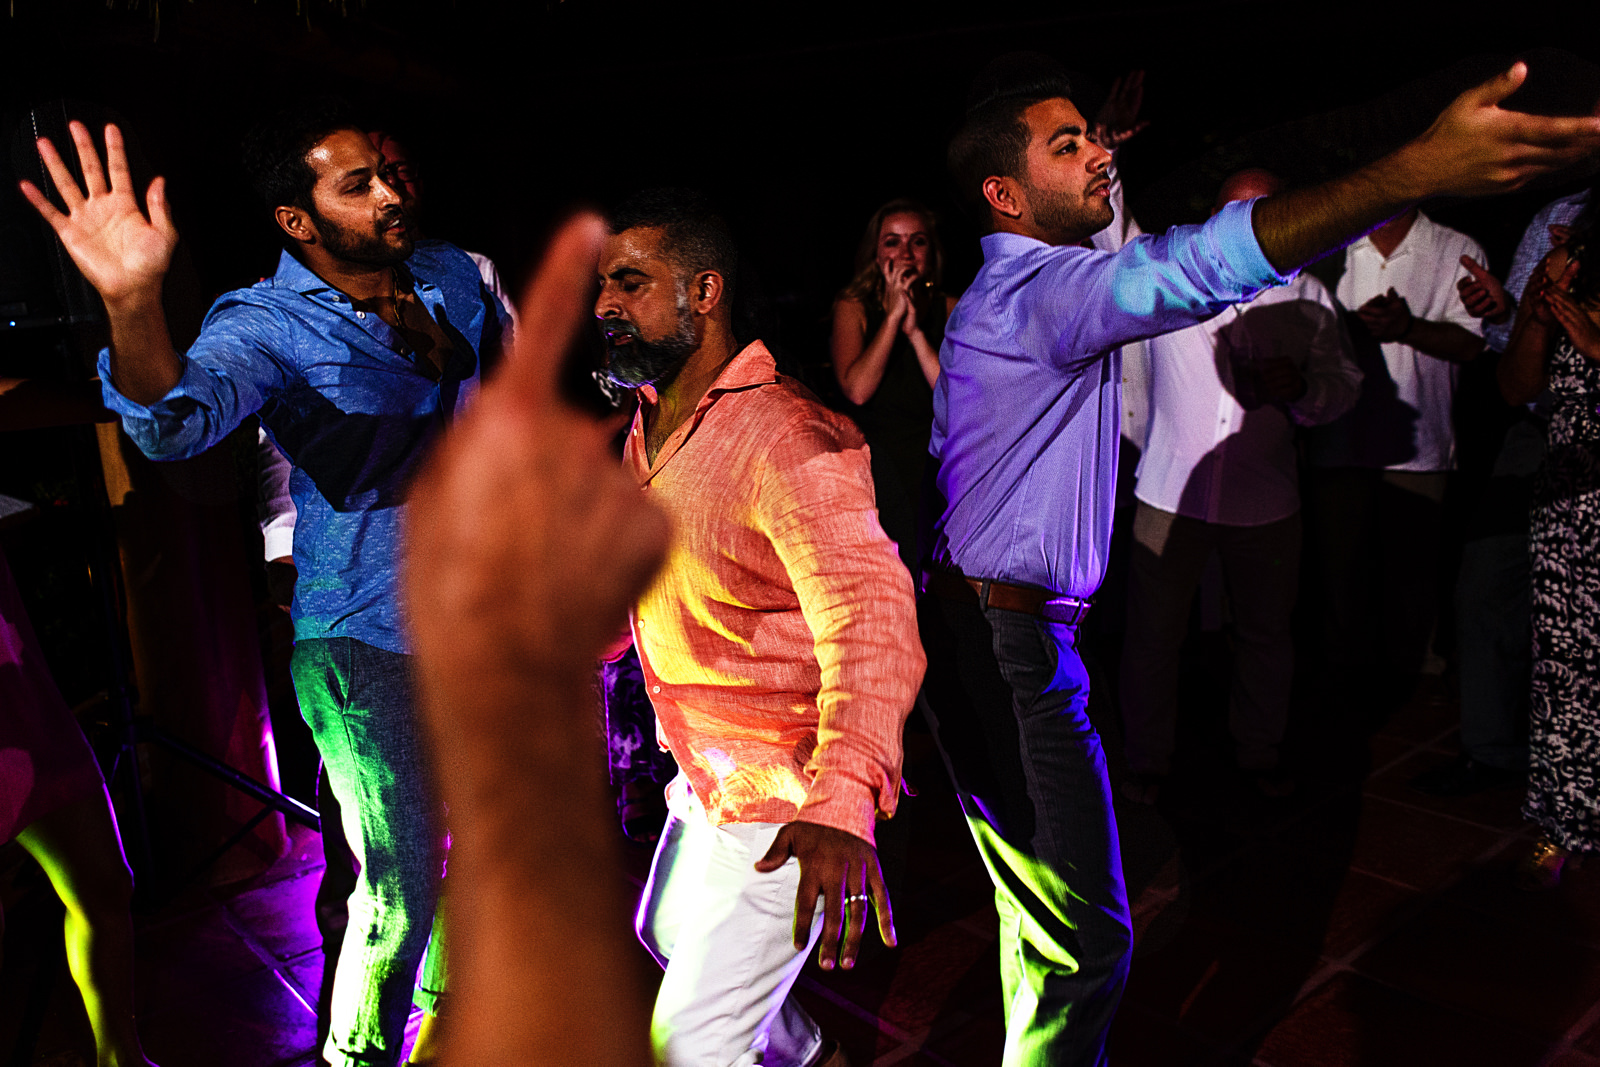 Groom and hindi guests dance their music style